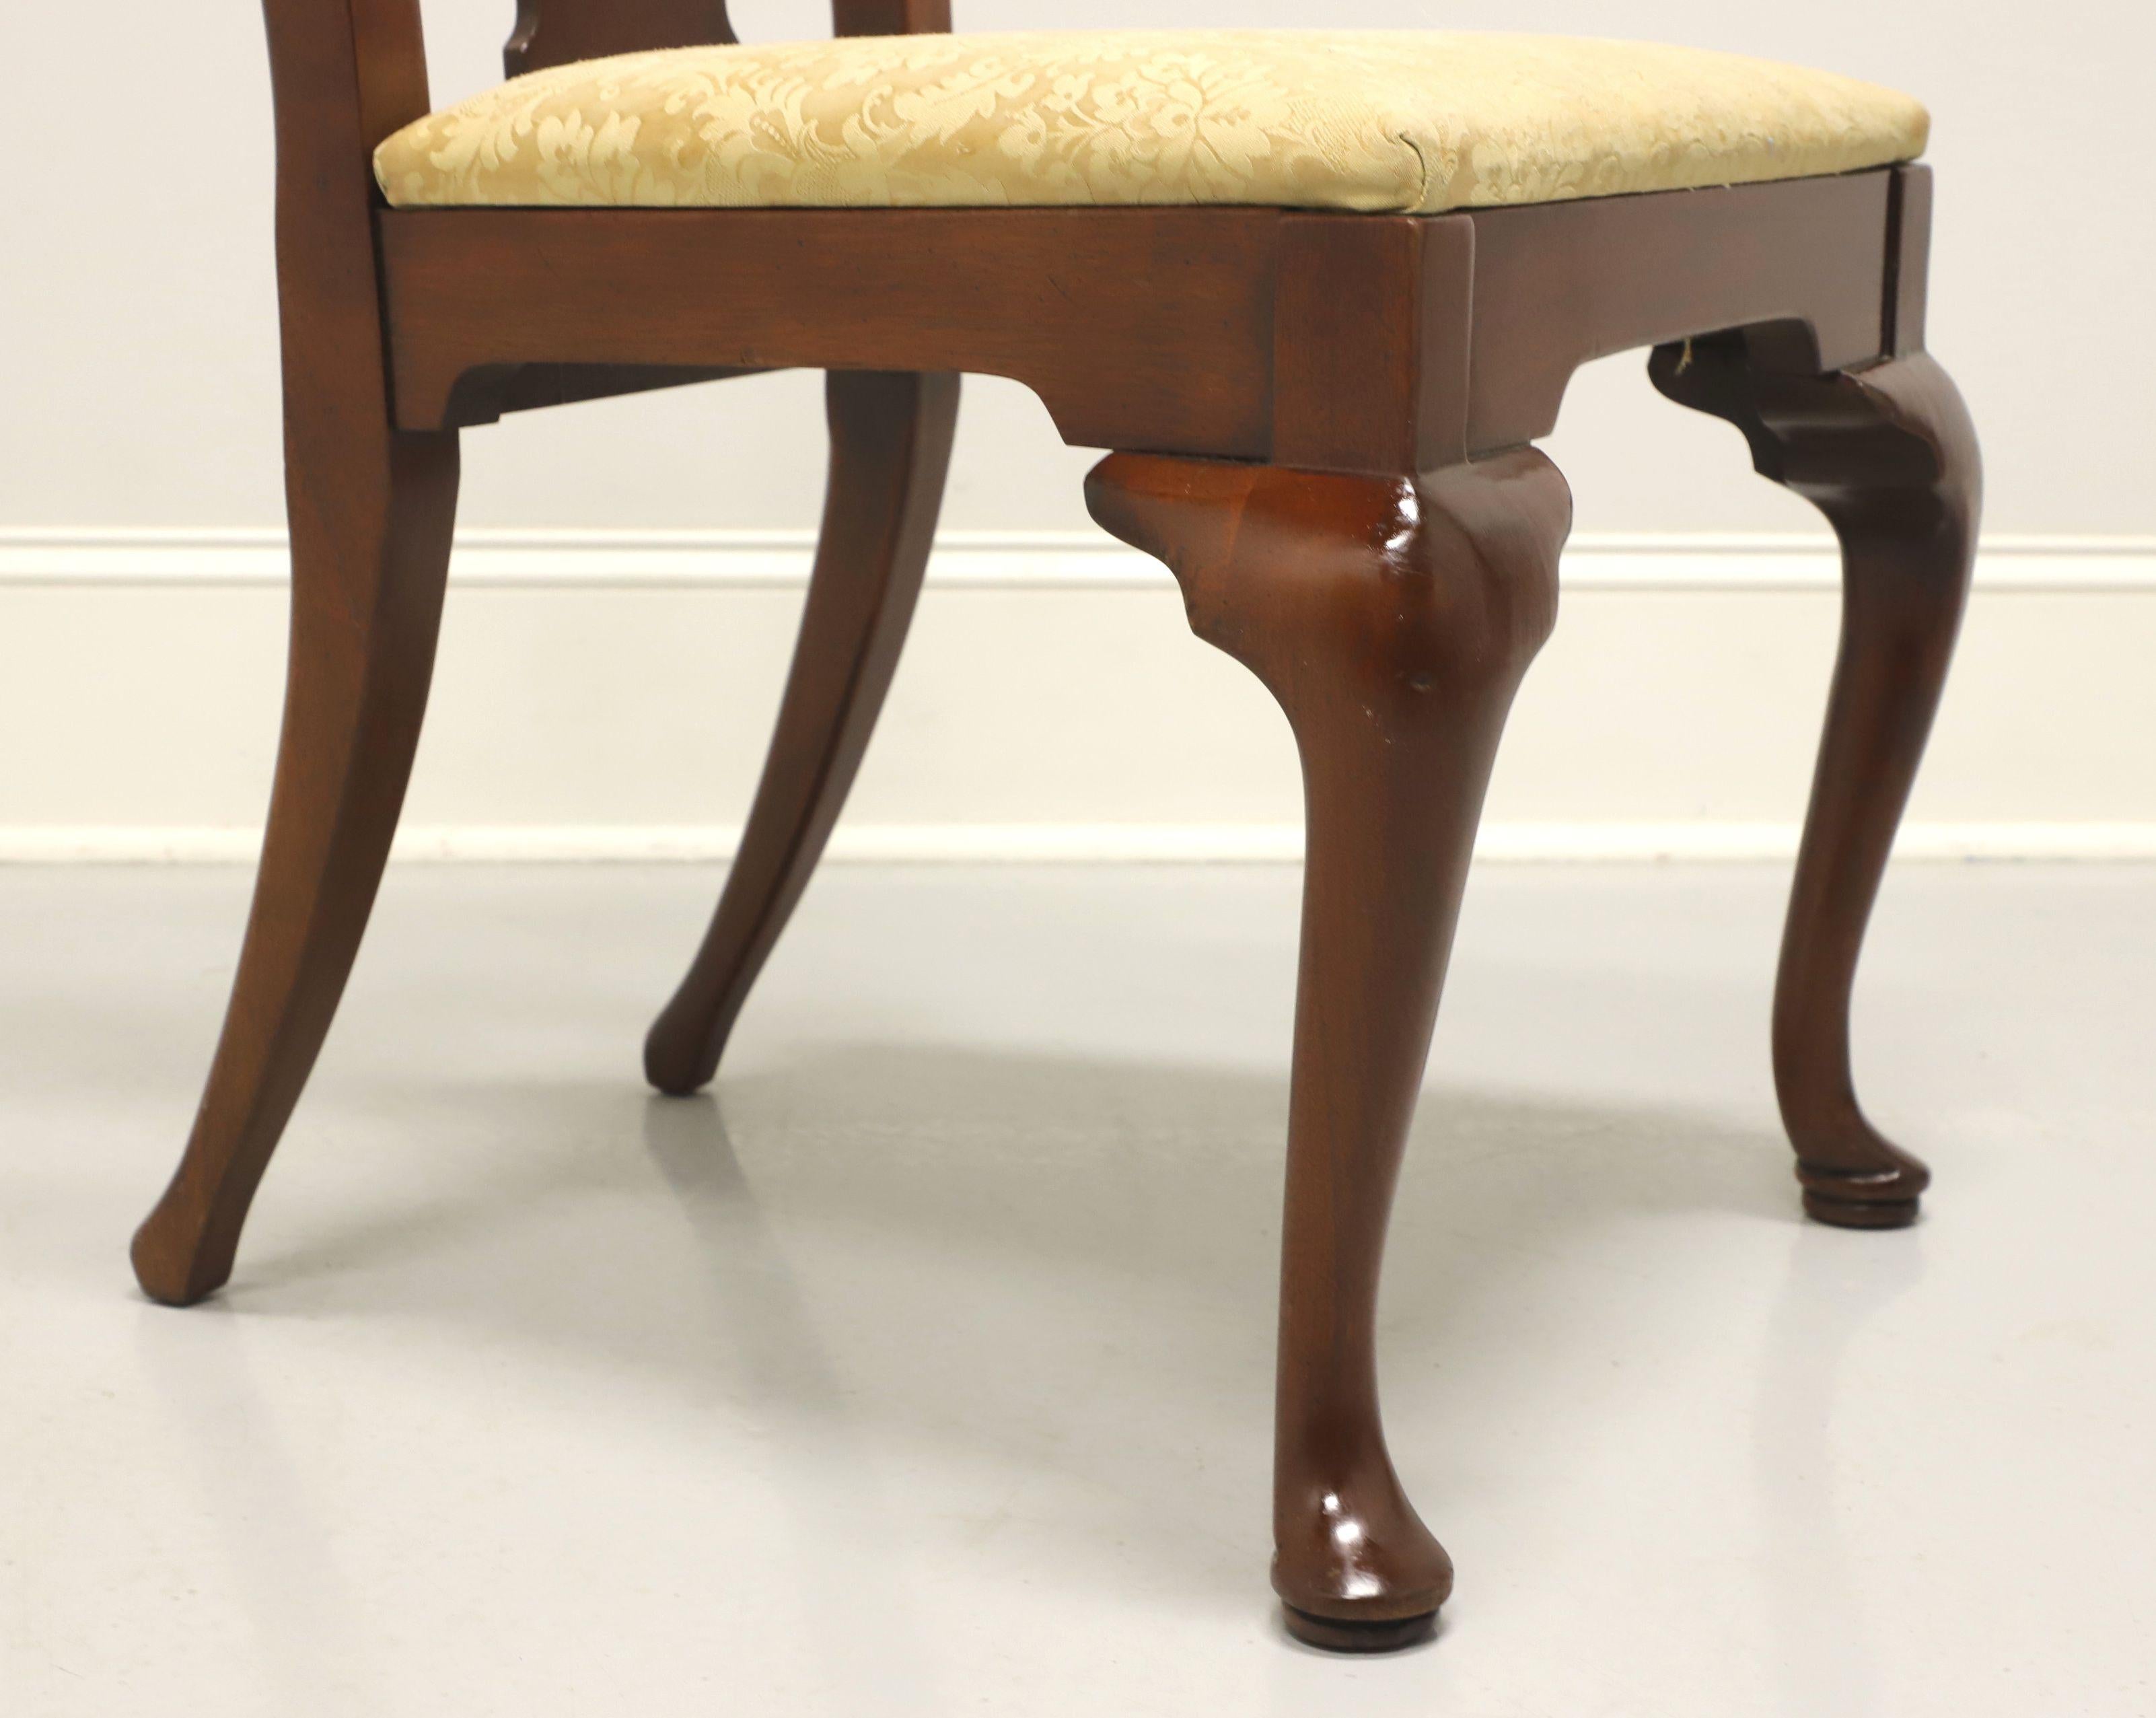 HICKORY CHAIR Amber Mahogany Queen Anne Dining Side Chairs - Pair C 3